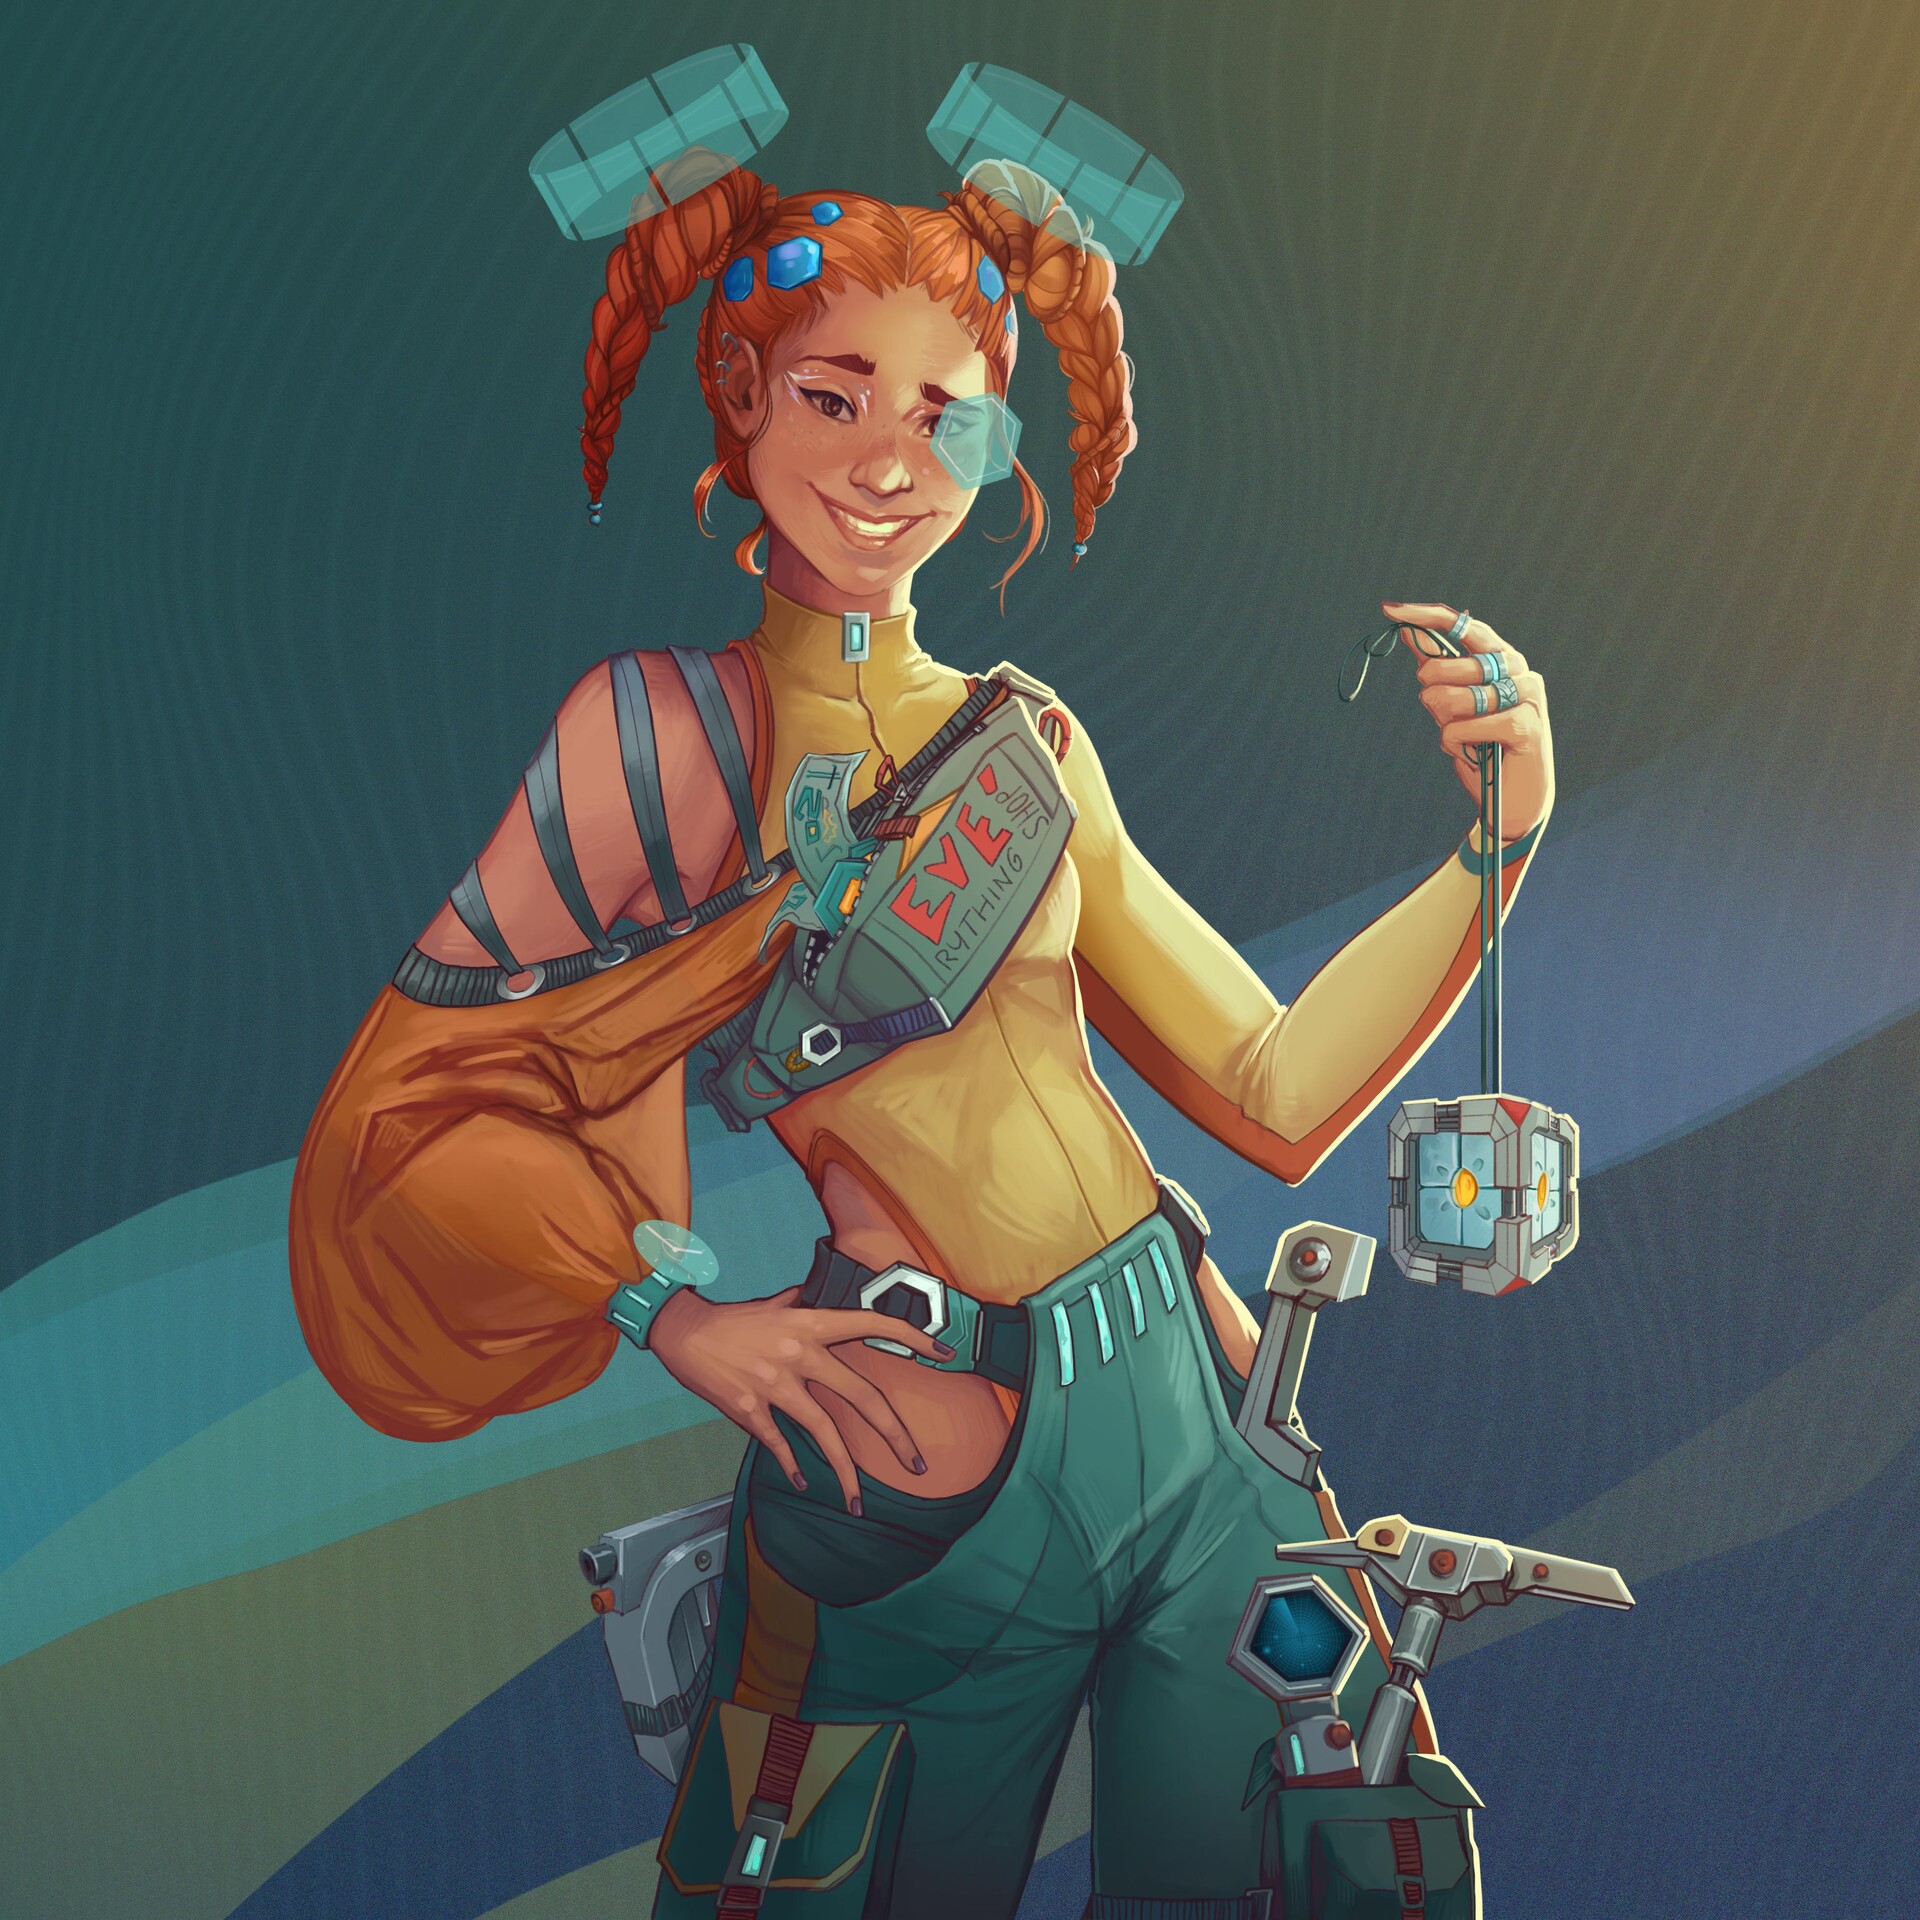 ArtStation - Character Design and Animation - Evelyn, the Tech Merchant